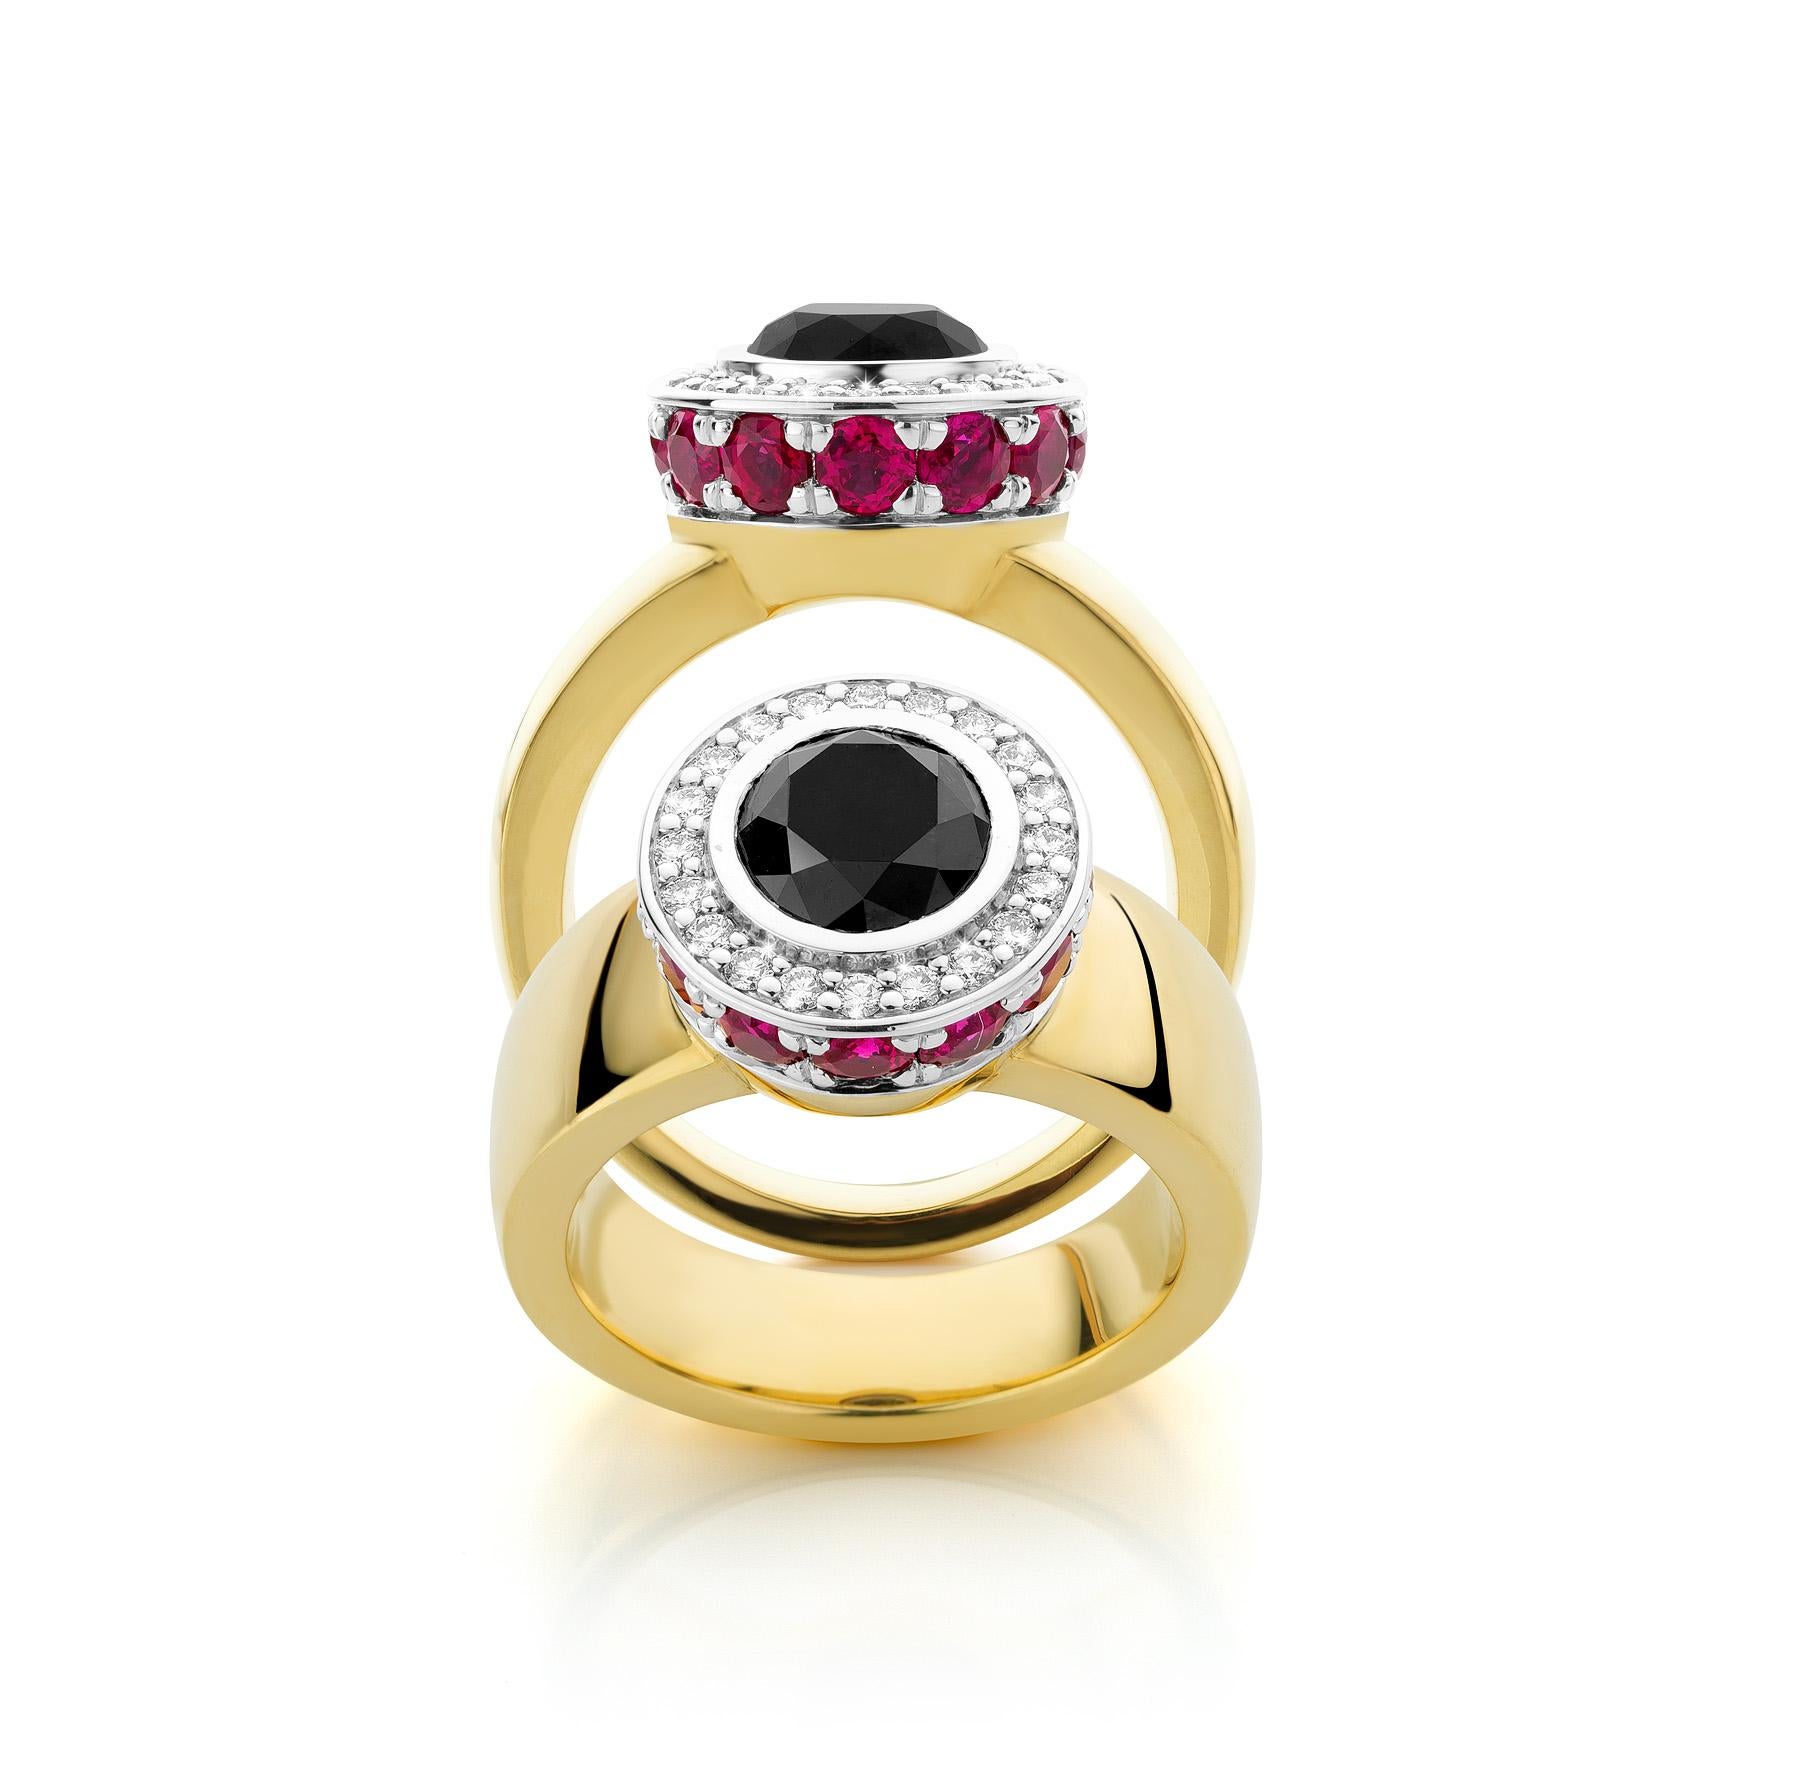 Brilliant Cut Cober with black Diamond of 1.98 Carat Diamonds and 1.77 Ct.Rubies Cocktail Ring For Sale